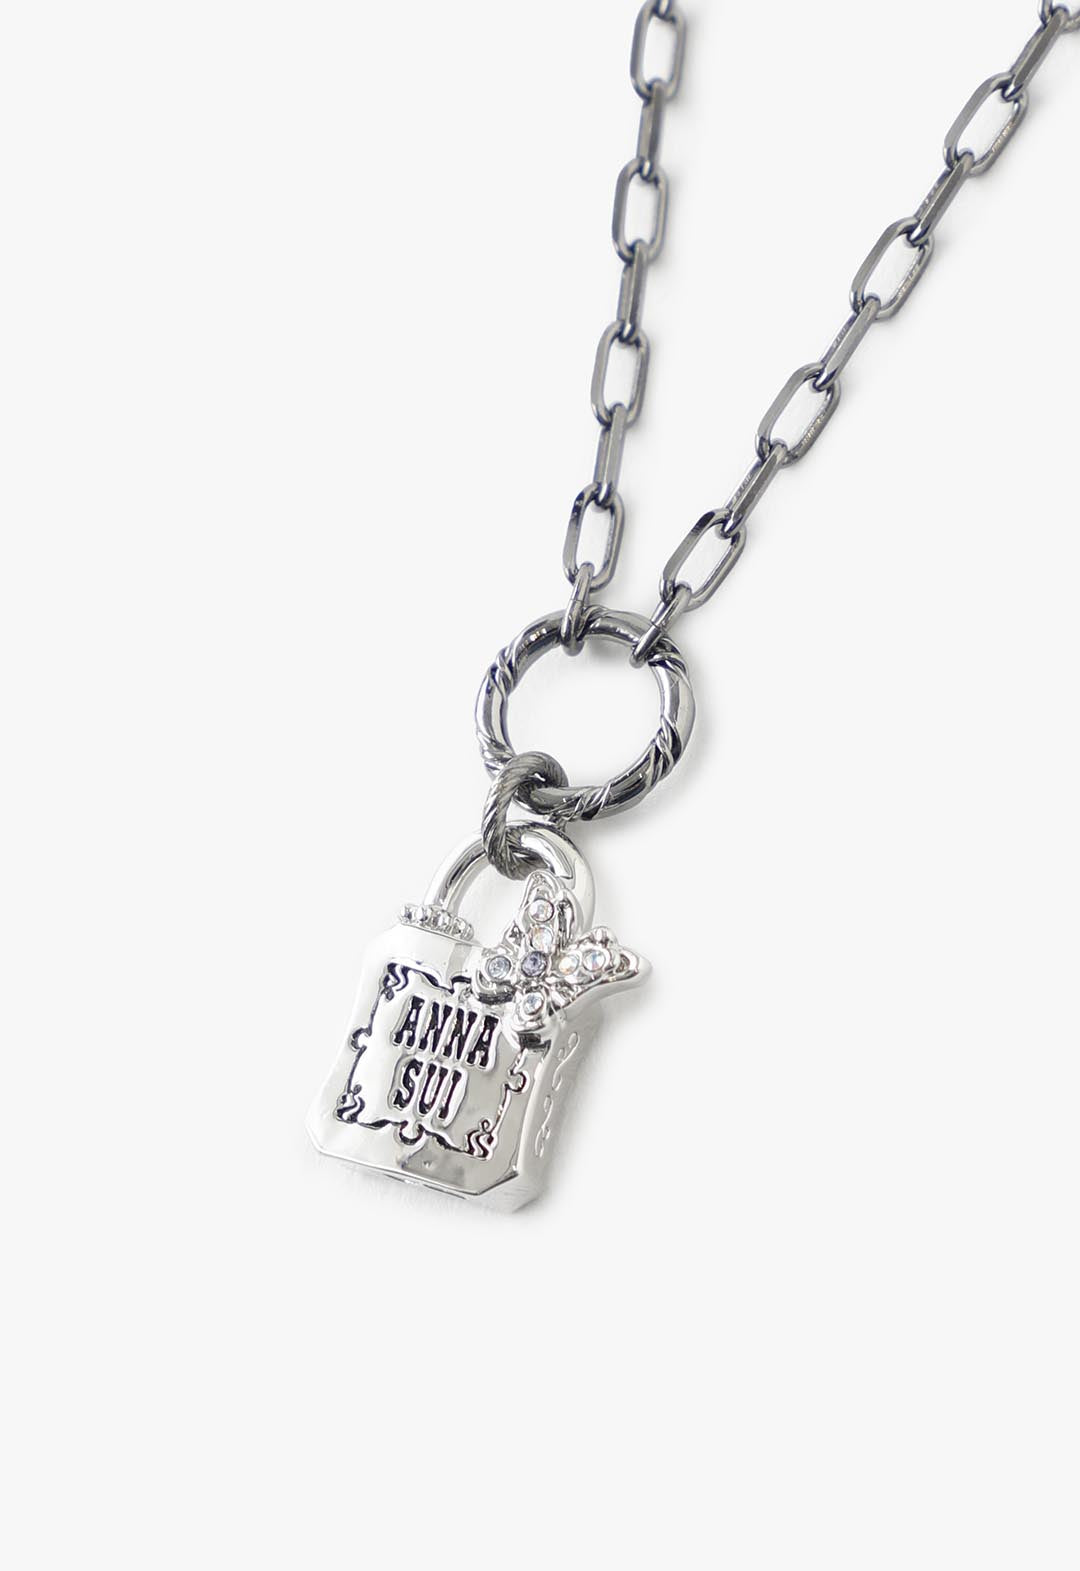 Details of the Wrath Ring include a polished silver chain linked with a glass butterfly and the Anna Sui logo on the lock